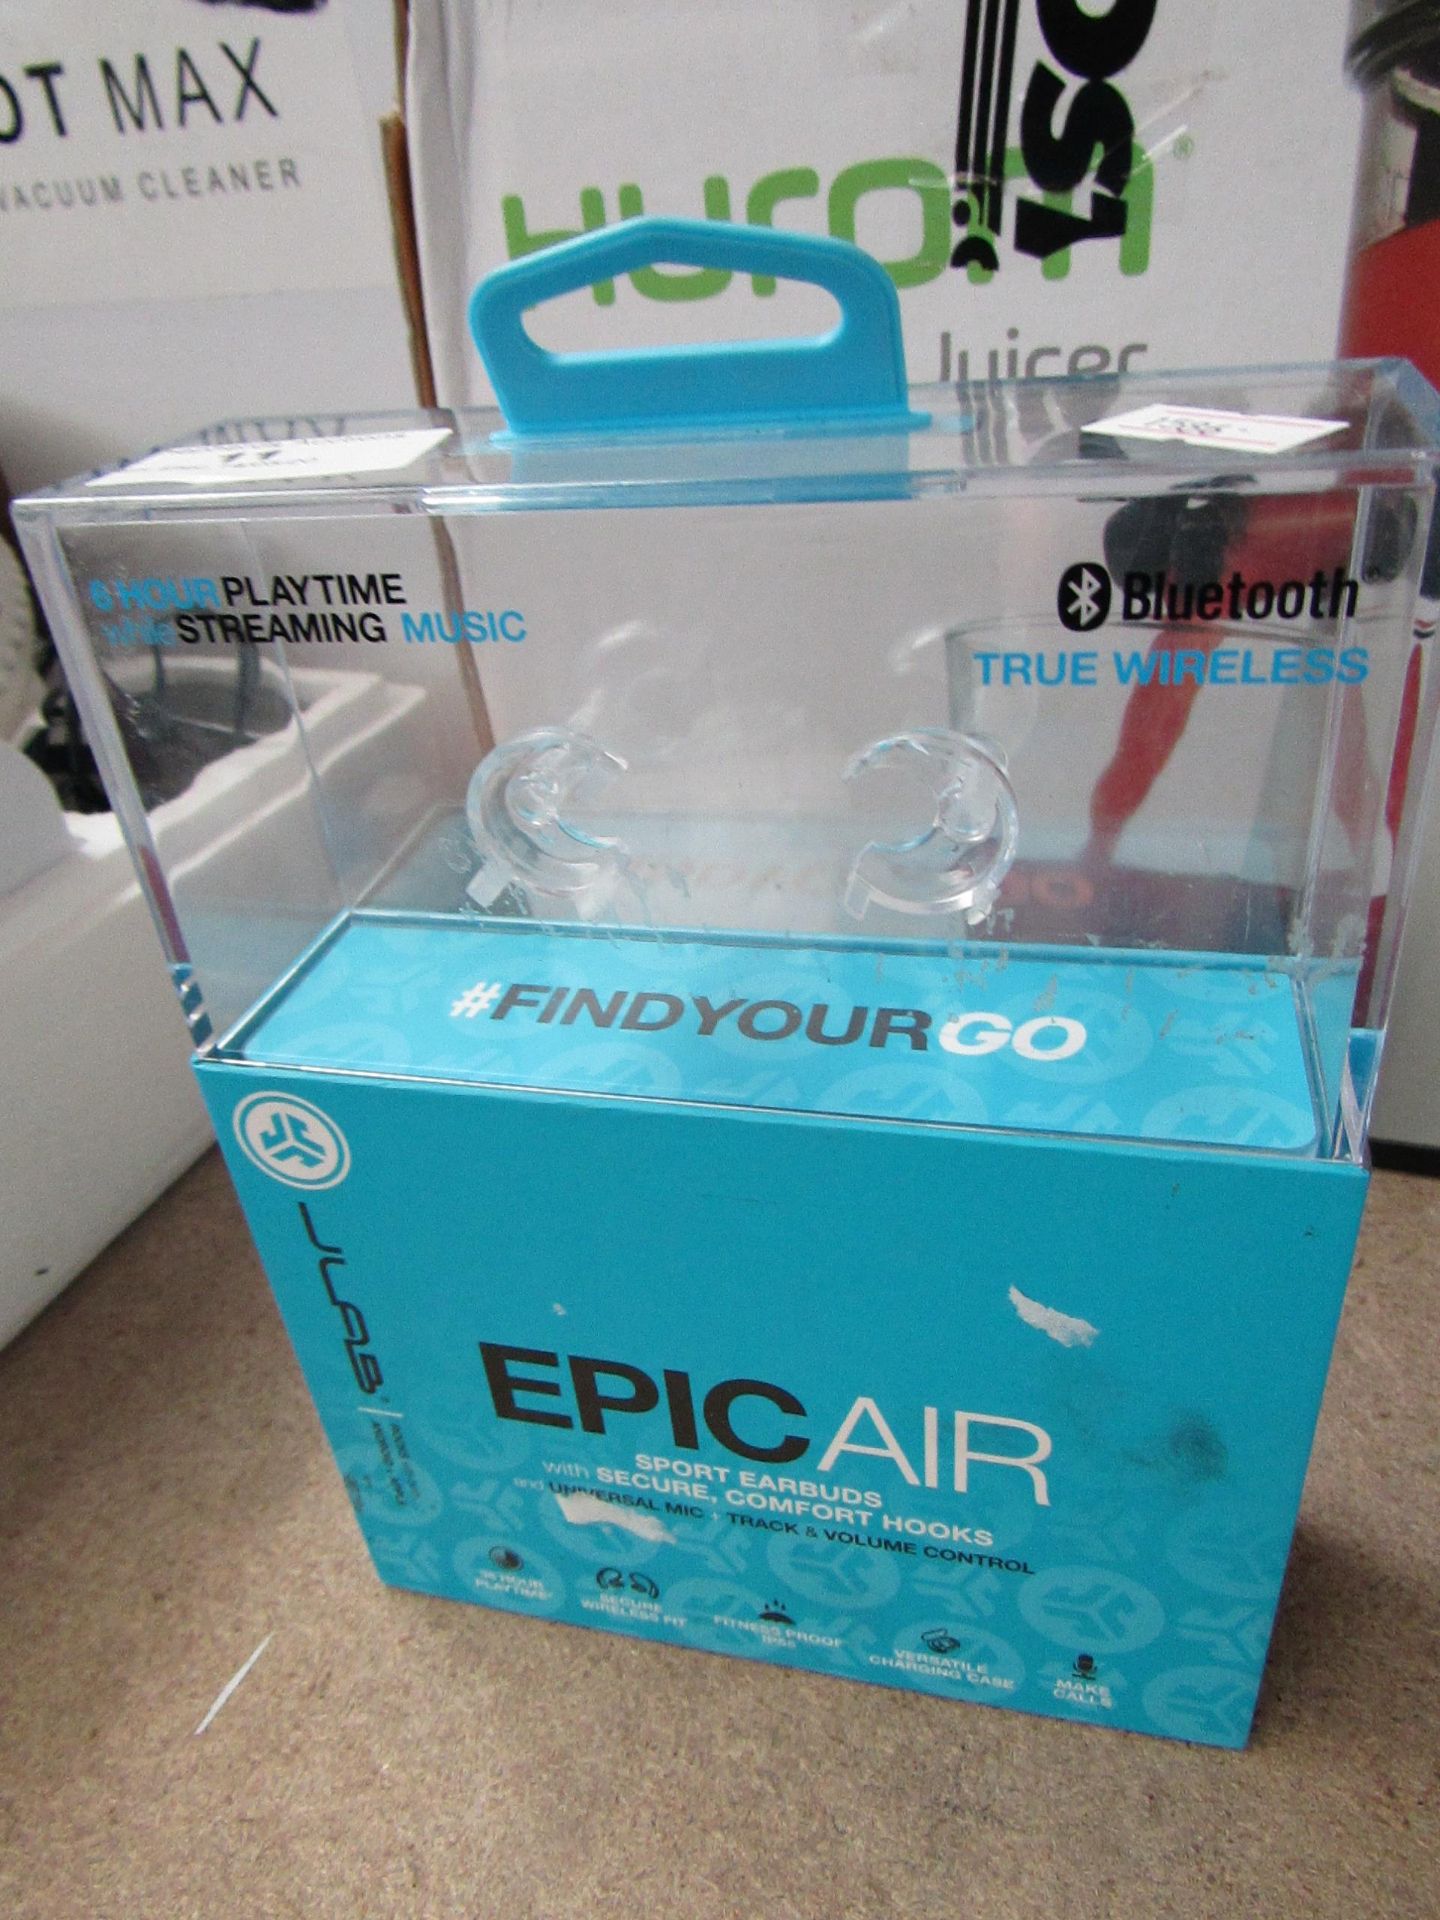 Jlabs Epic air wireless sport earbuds with charging storgage case, tested working with original